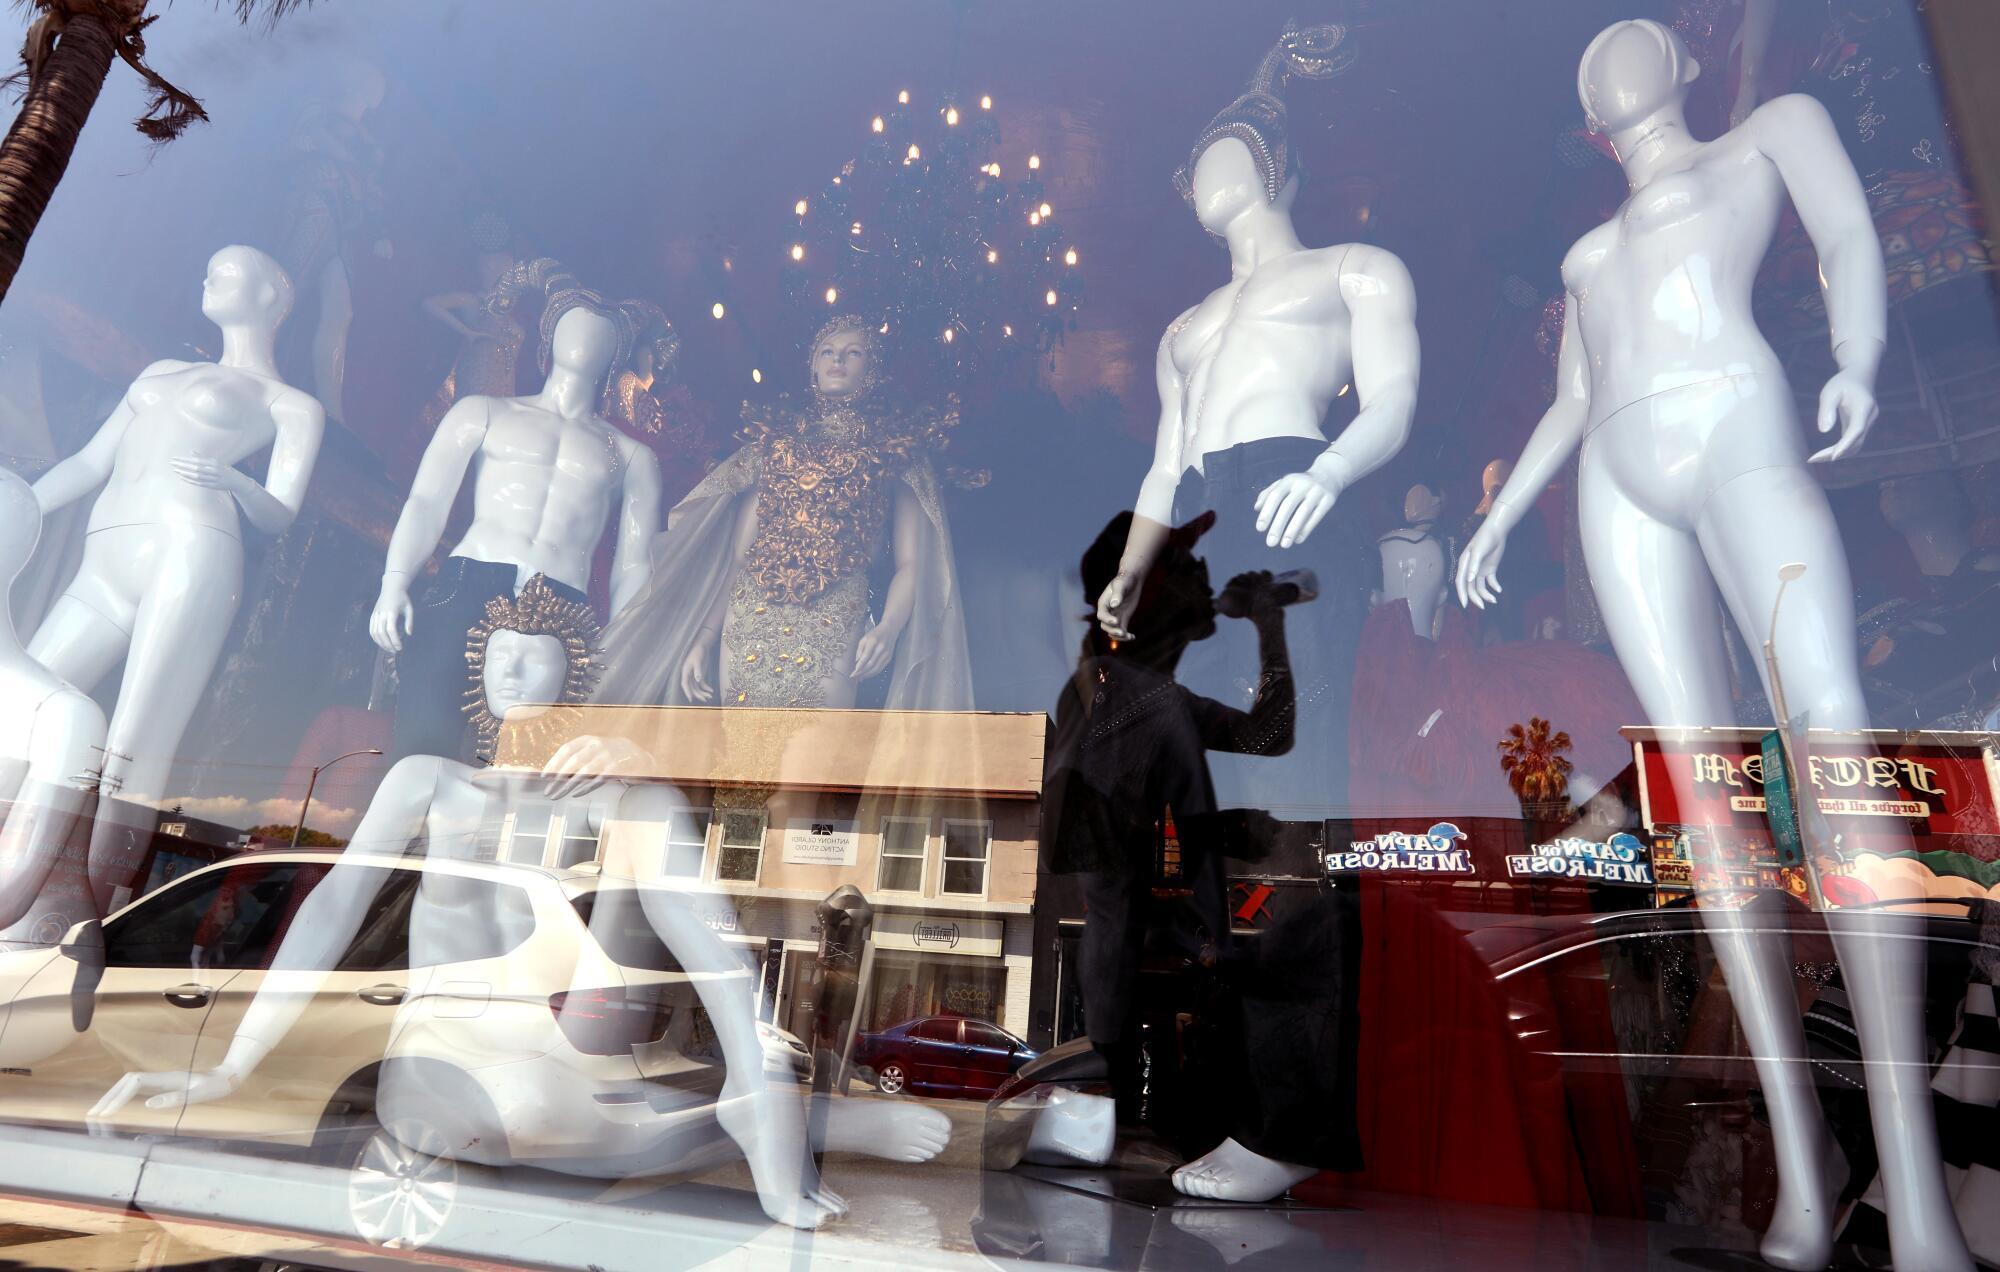 The image of a pedestrian drinking is reflected in a shop window displaying mannequins